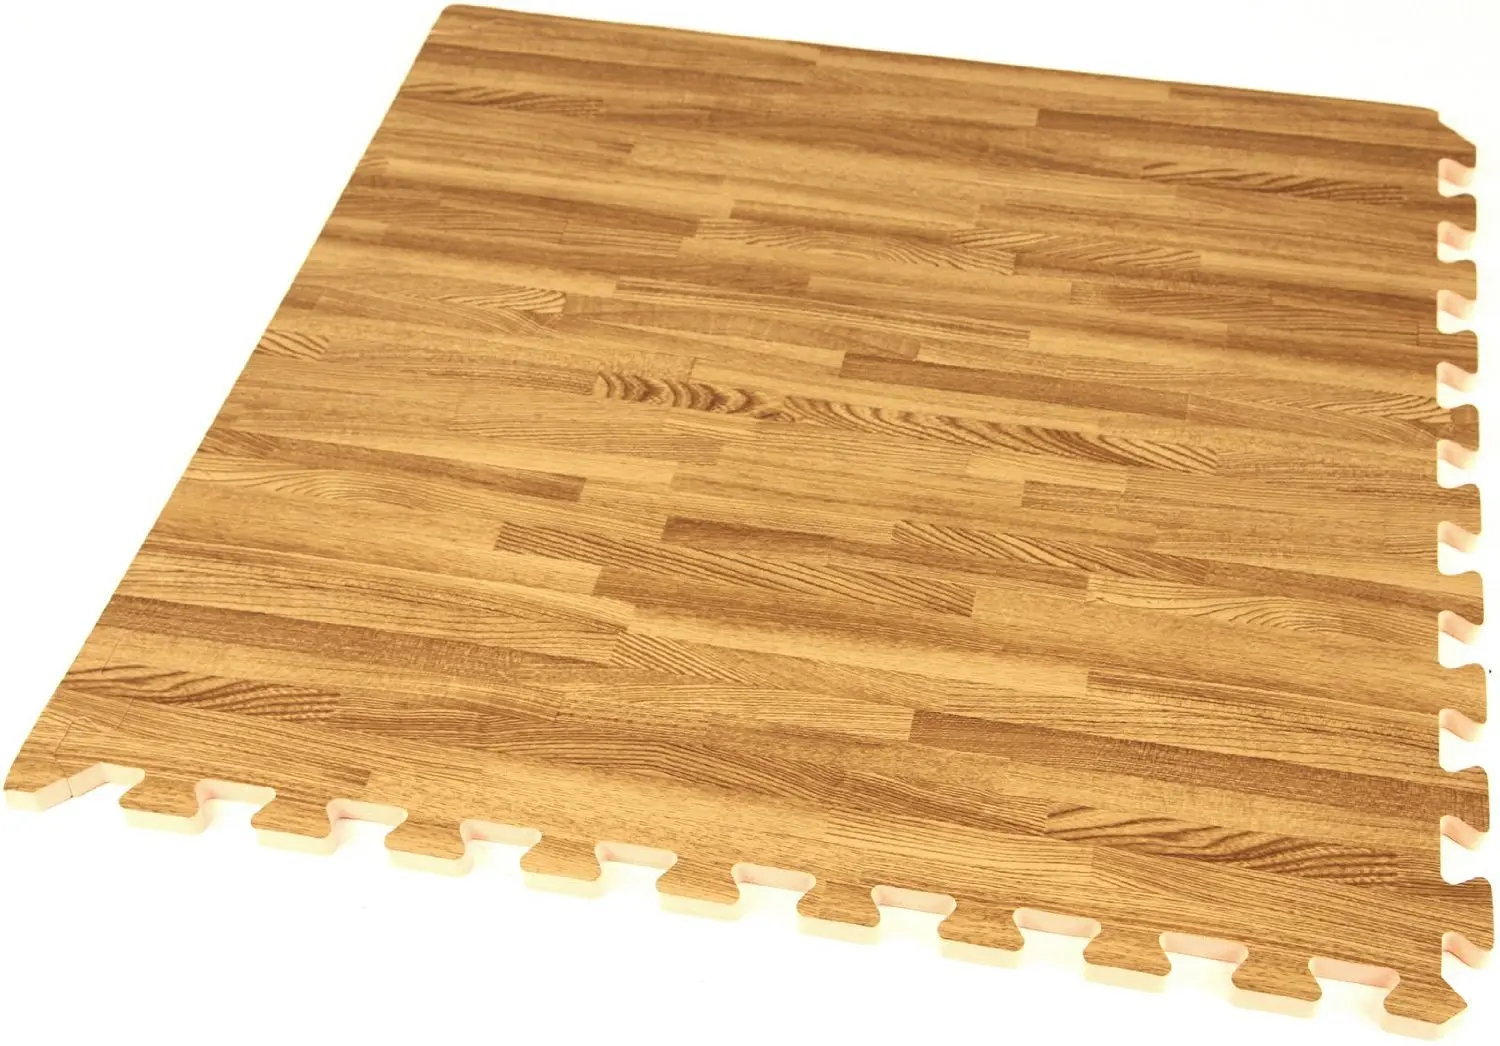 Cheap Types Soft Wood, find Types Soft Wood deals on line at Alibaba.com